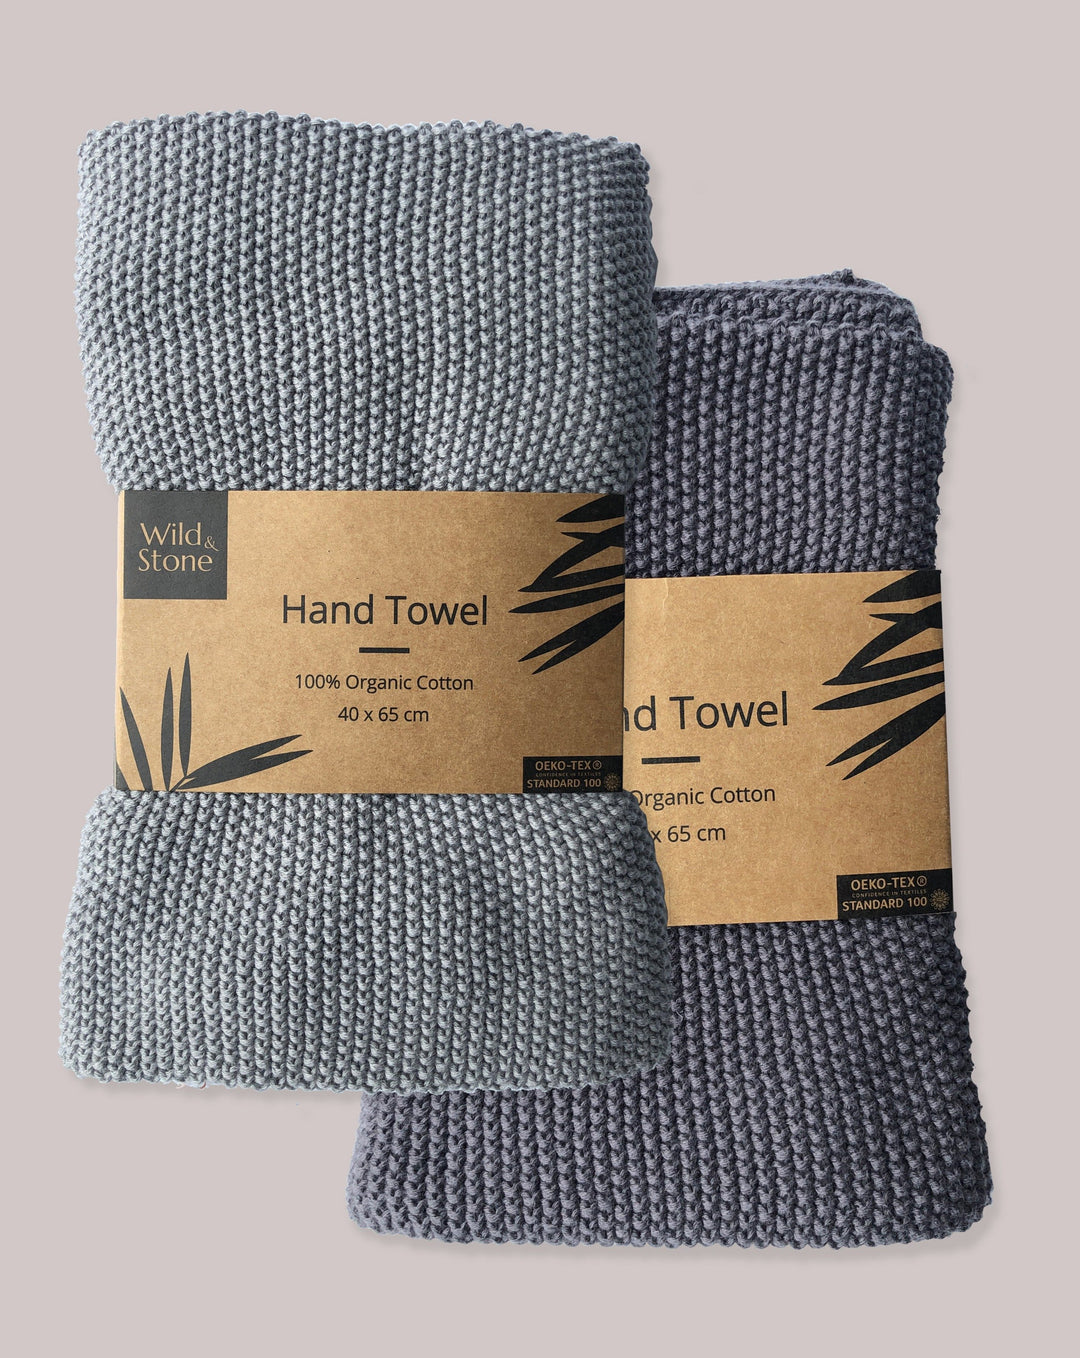 WILD AND STONE ORGANIC COTTON HAND TOWELS Organic Cotton Hand Towel - Dove Grey.